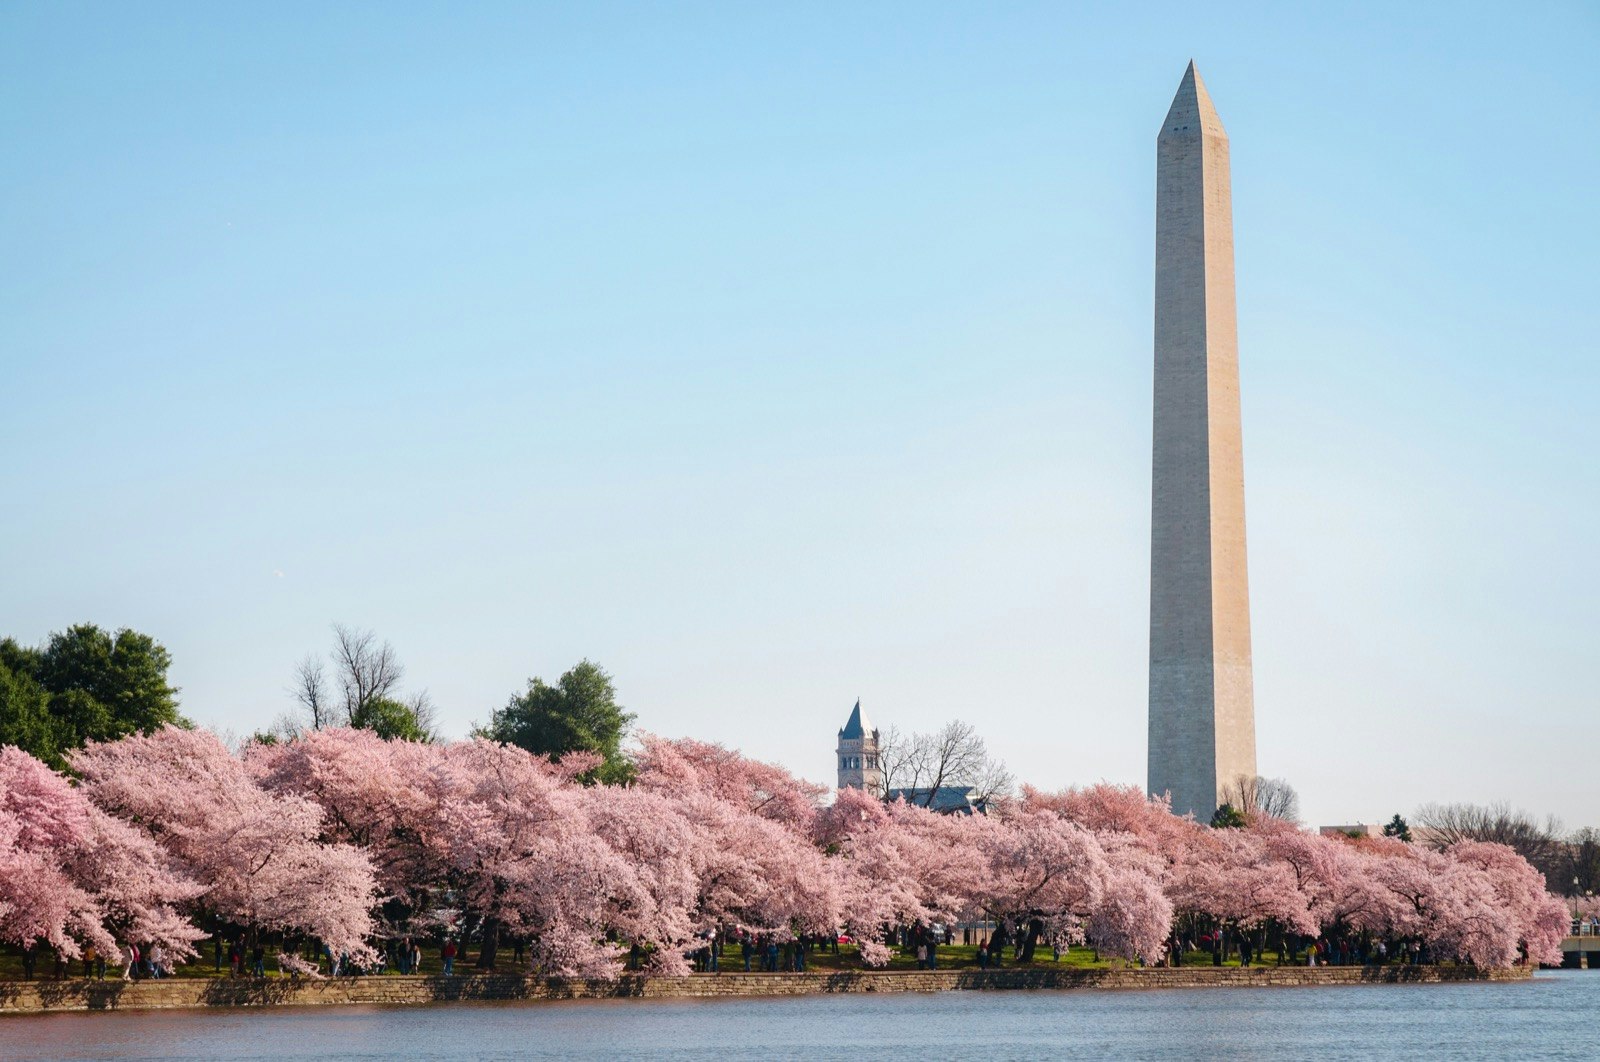 Cherry blossom trees bloom bright pink in a row leading up to the Washington Monument